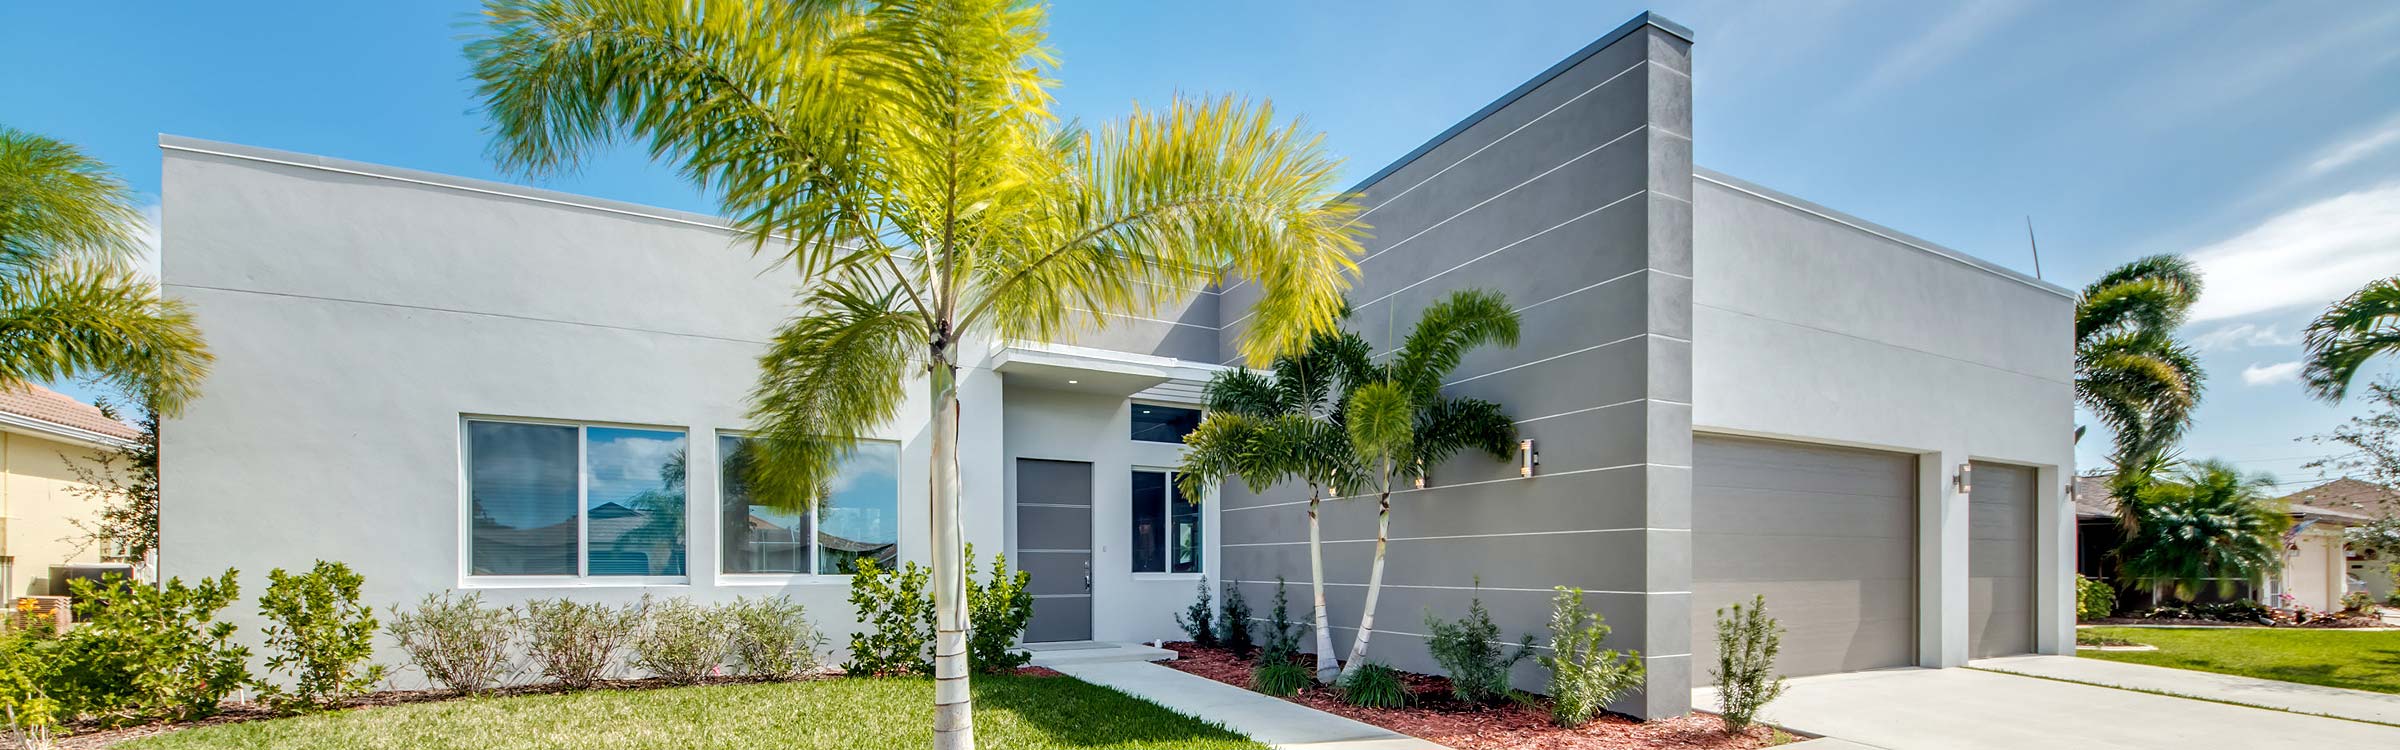 New Construction Florida - Cape Coral, Fort Myers